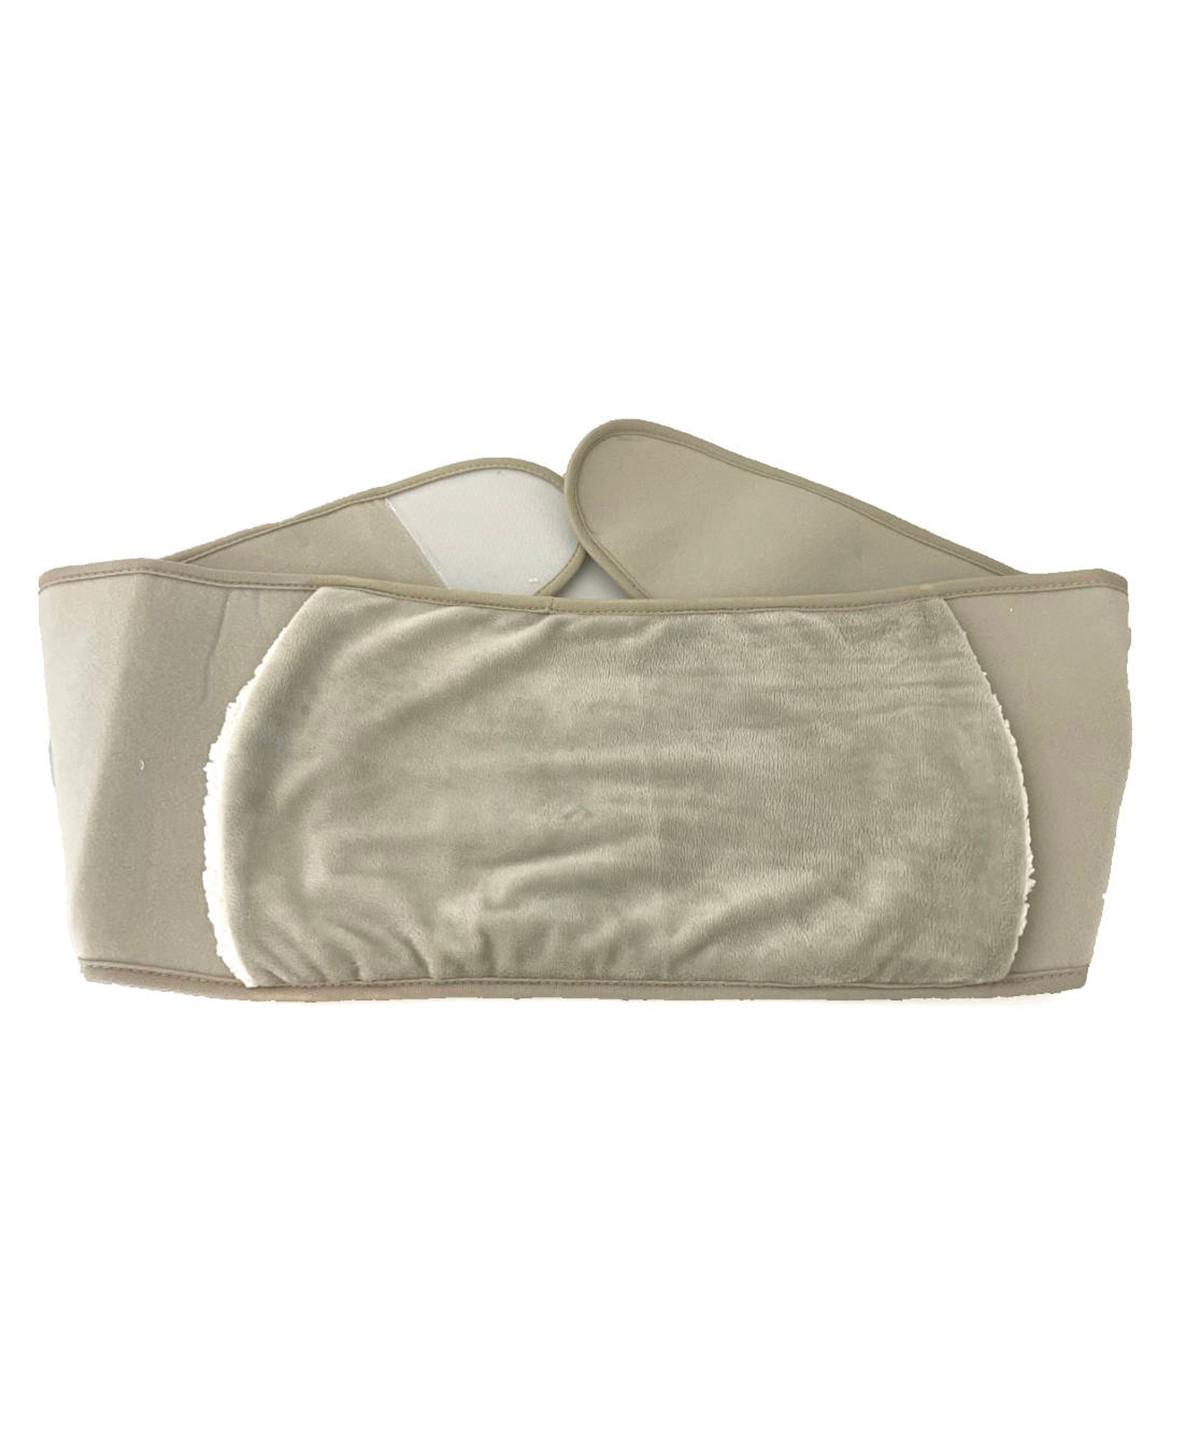 Beige - Body pouch water bottle Hot Water Bottle Covers Home & Living Home Comforts, Homewares & Towelling, New in Schoolwear Centres